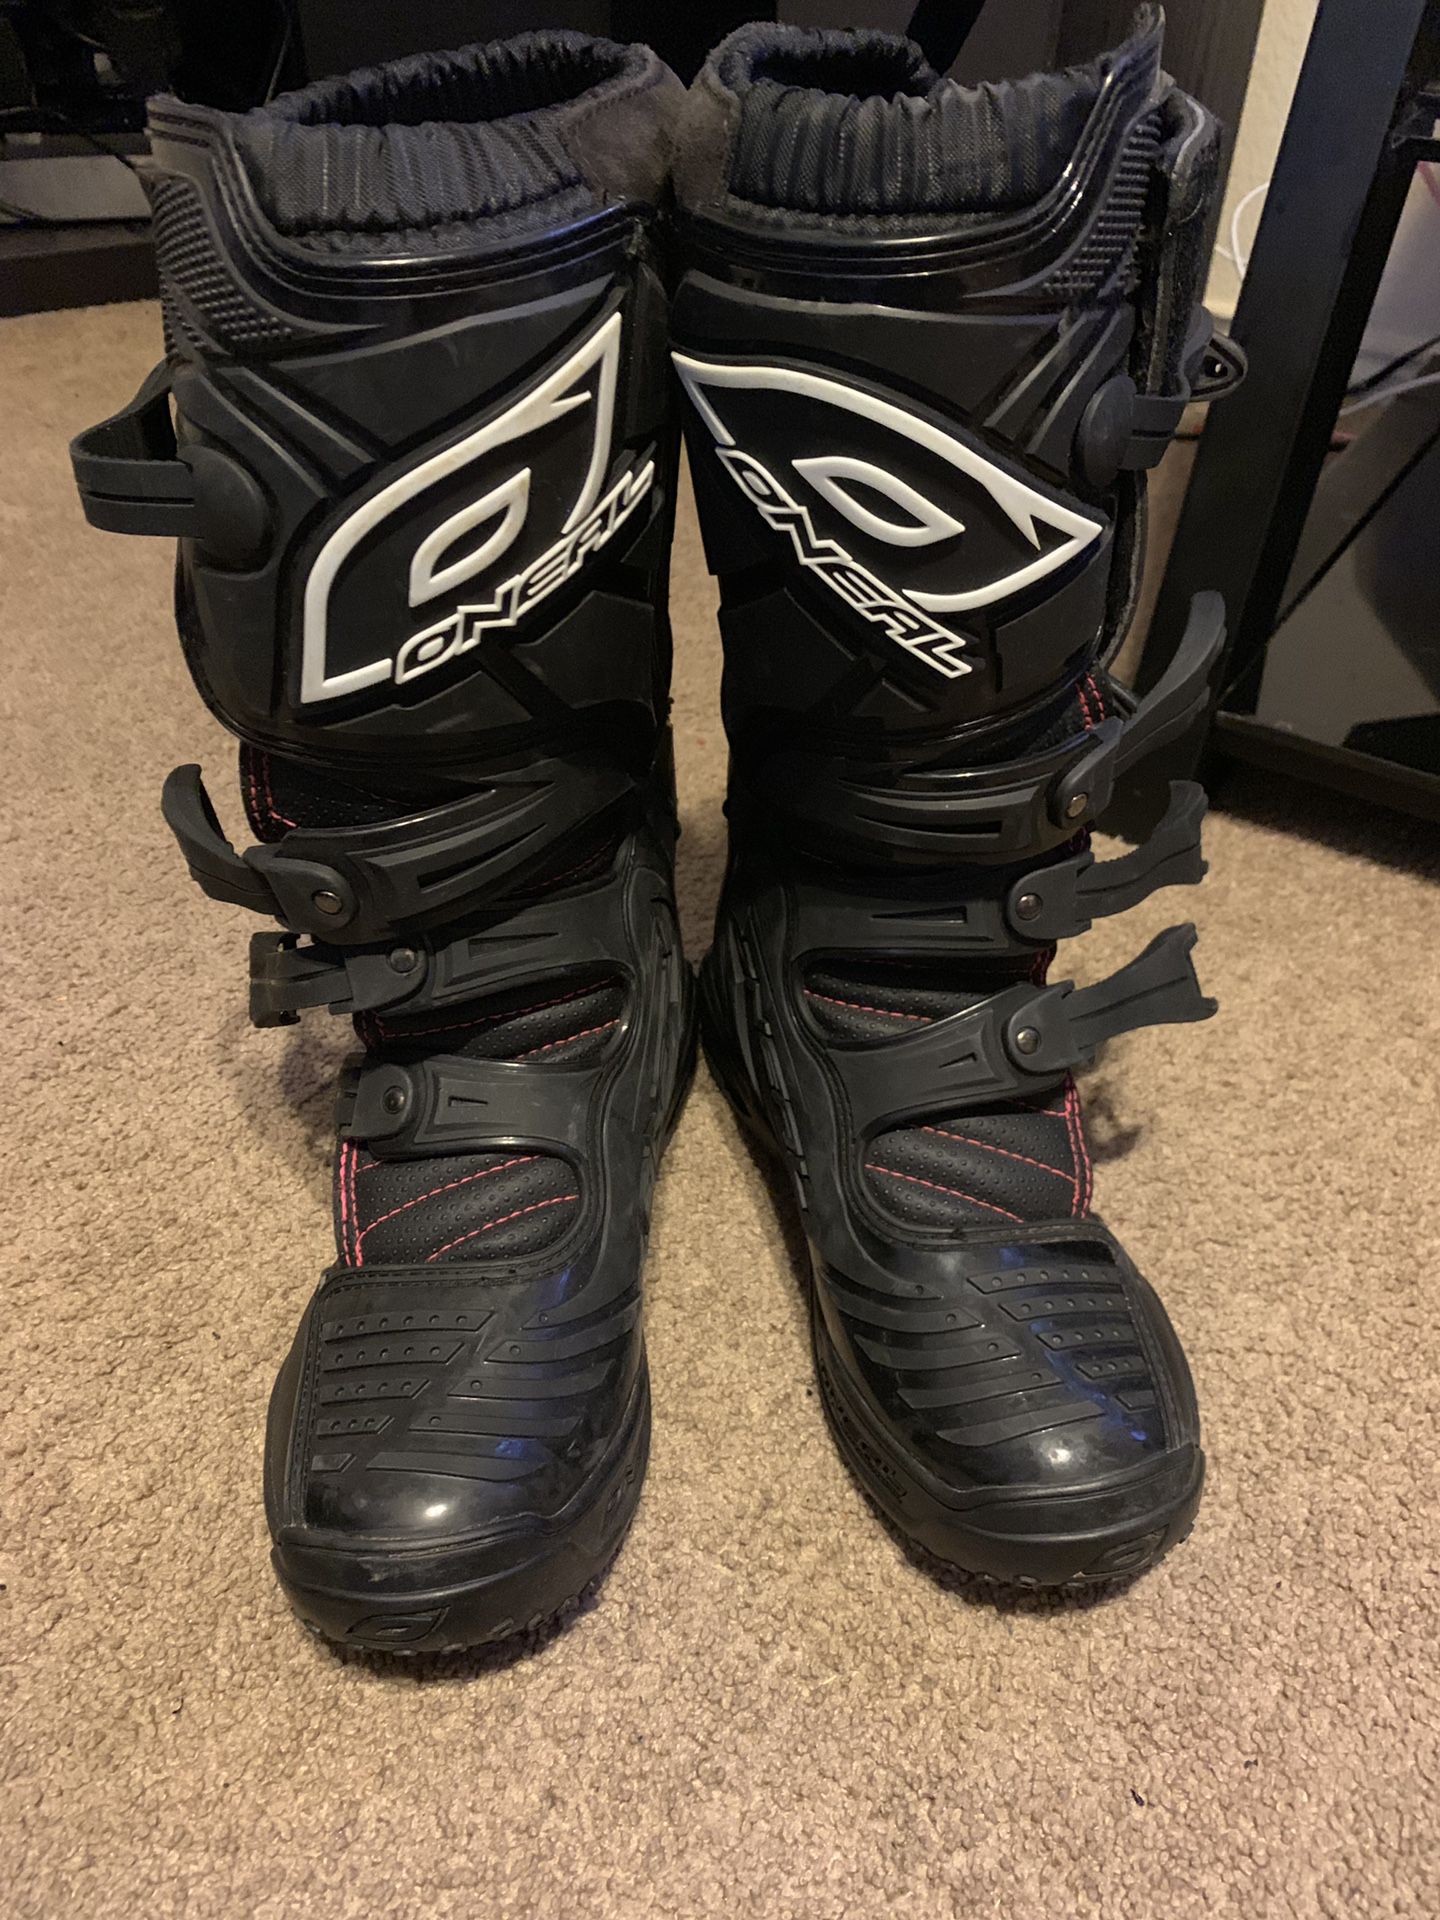 Women’s boots size 9